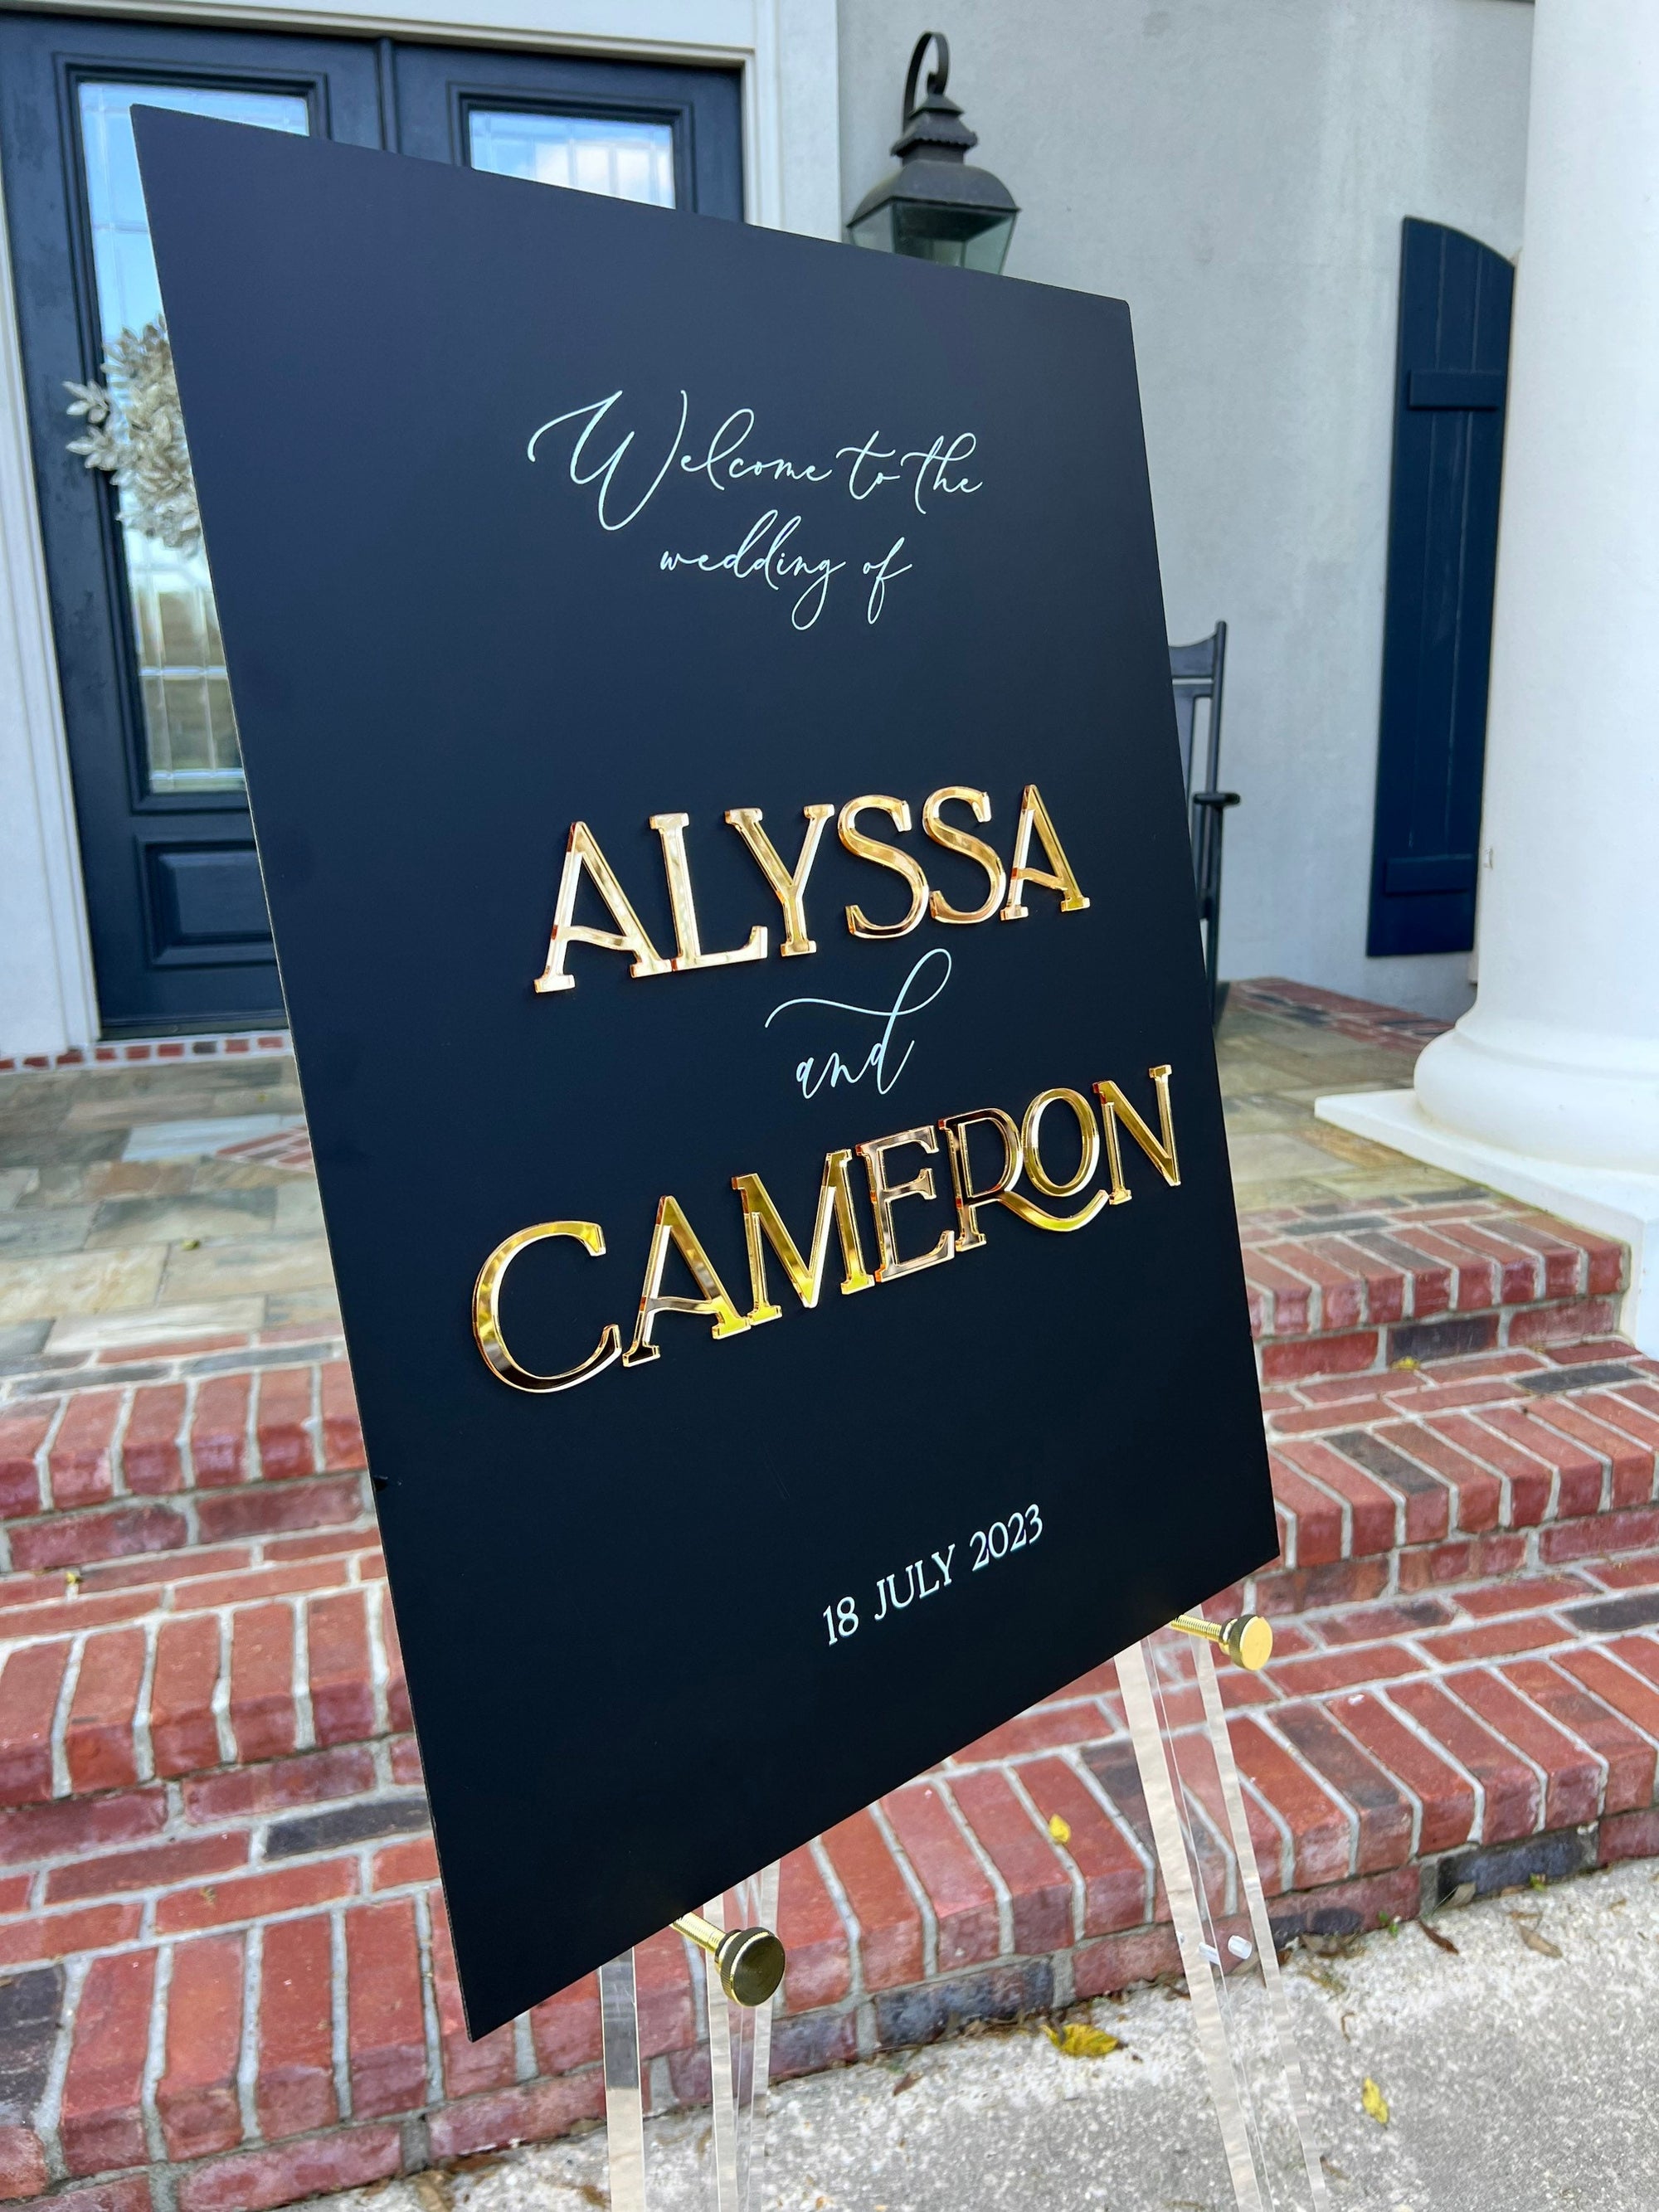 DESIGN 2 3D Event Entry Signs with Laser Cut Wording - Sign Sizes 18"x24" or 24"x36" 3D-WWSD